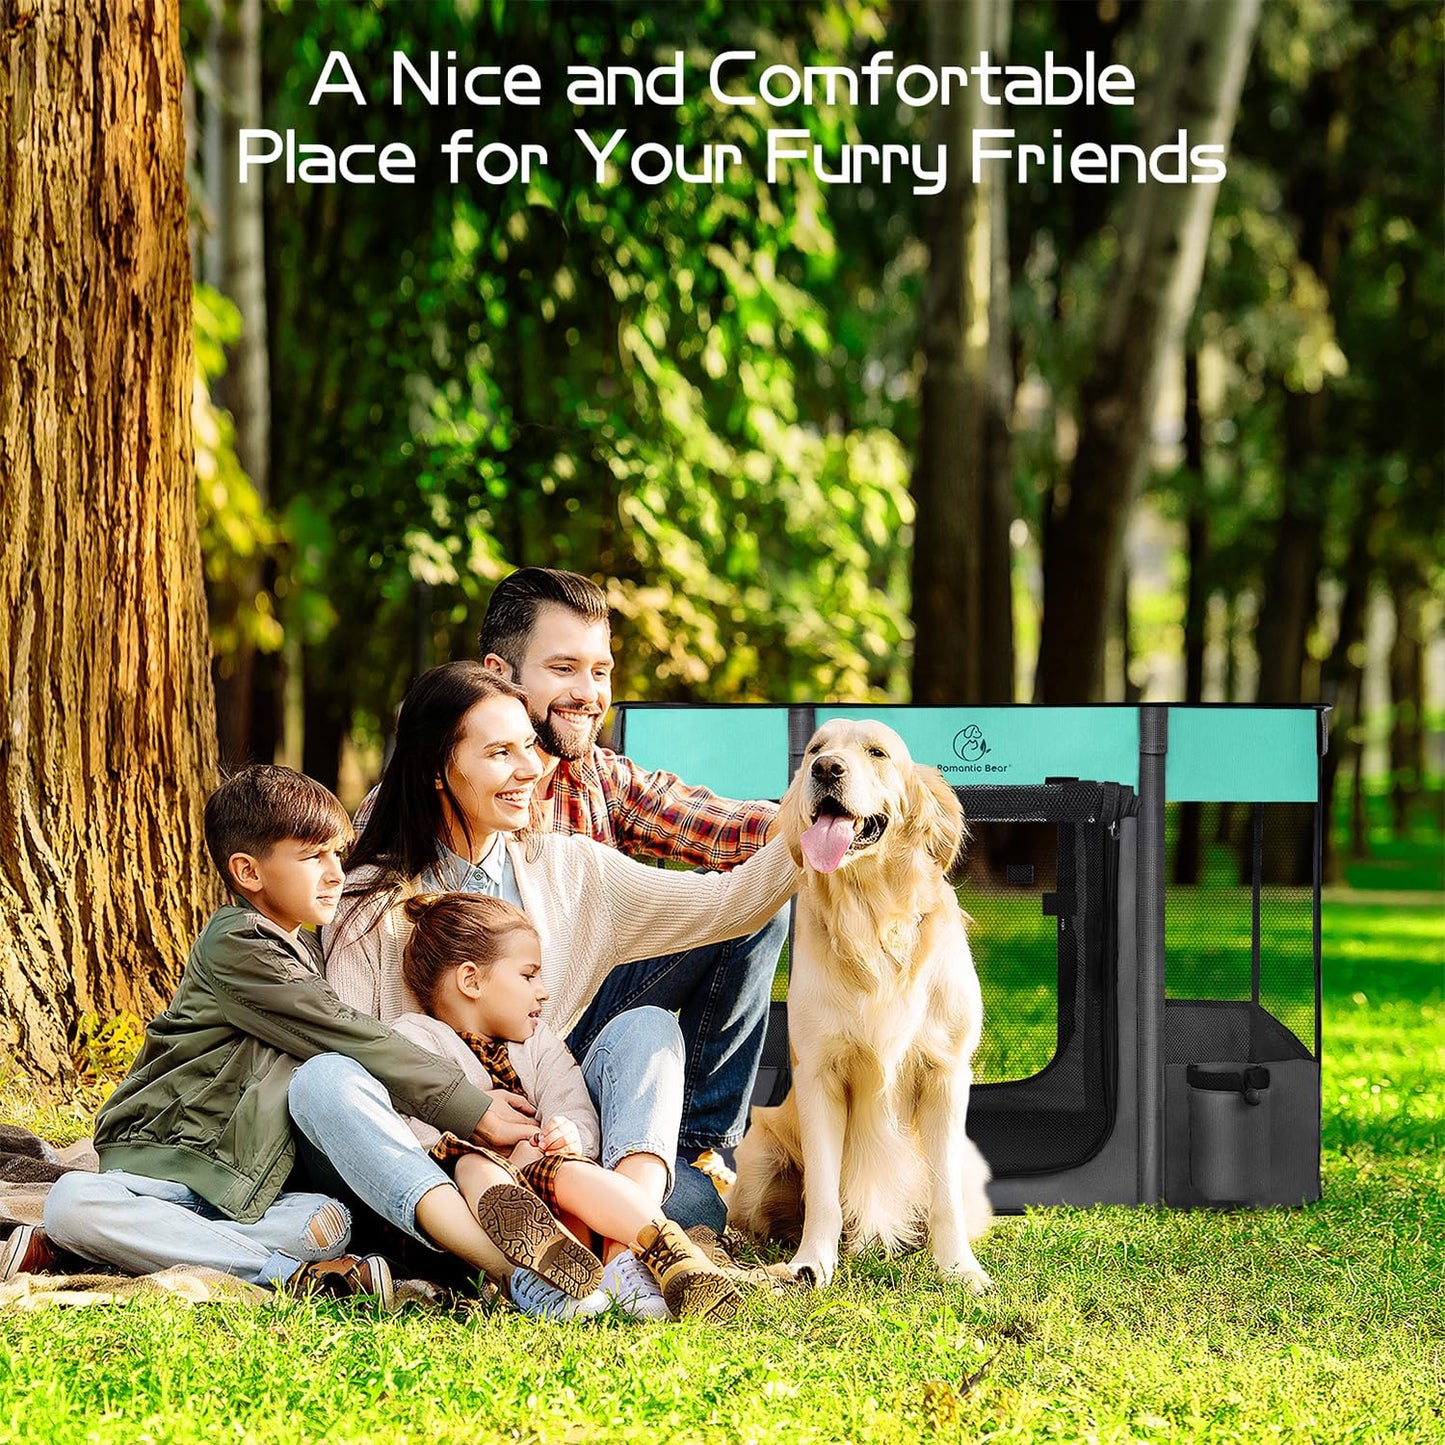 Dog Playpen,Pet Playpen, Foldable Dog Cat Playpens,Portable Exercise Kennel Tent Crate, Water-Resistant Breathable Shade Cover, Indoor Outdoor Travel Camping Use for Small Animals + Free Carrying Case